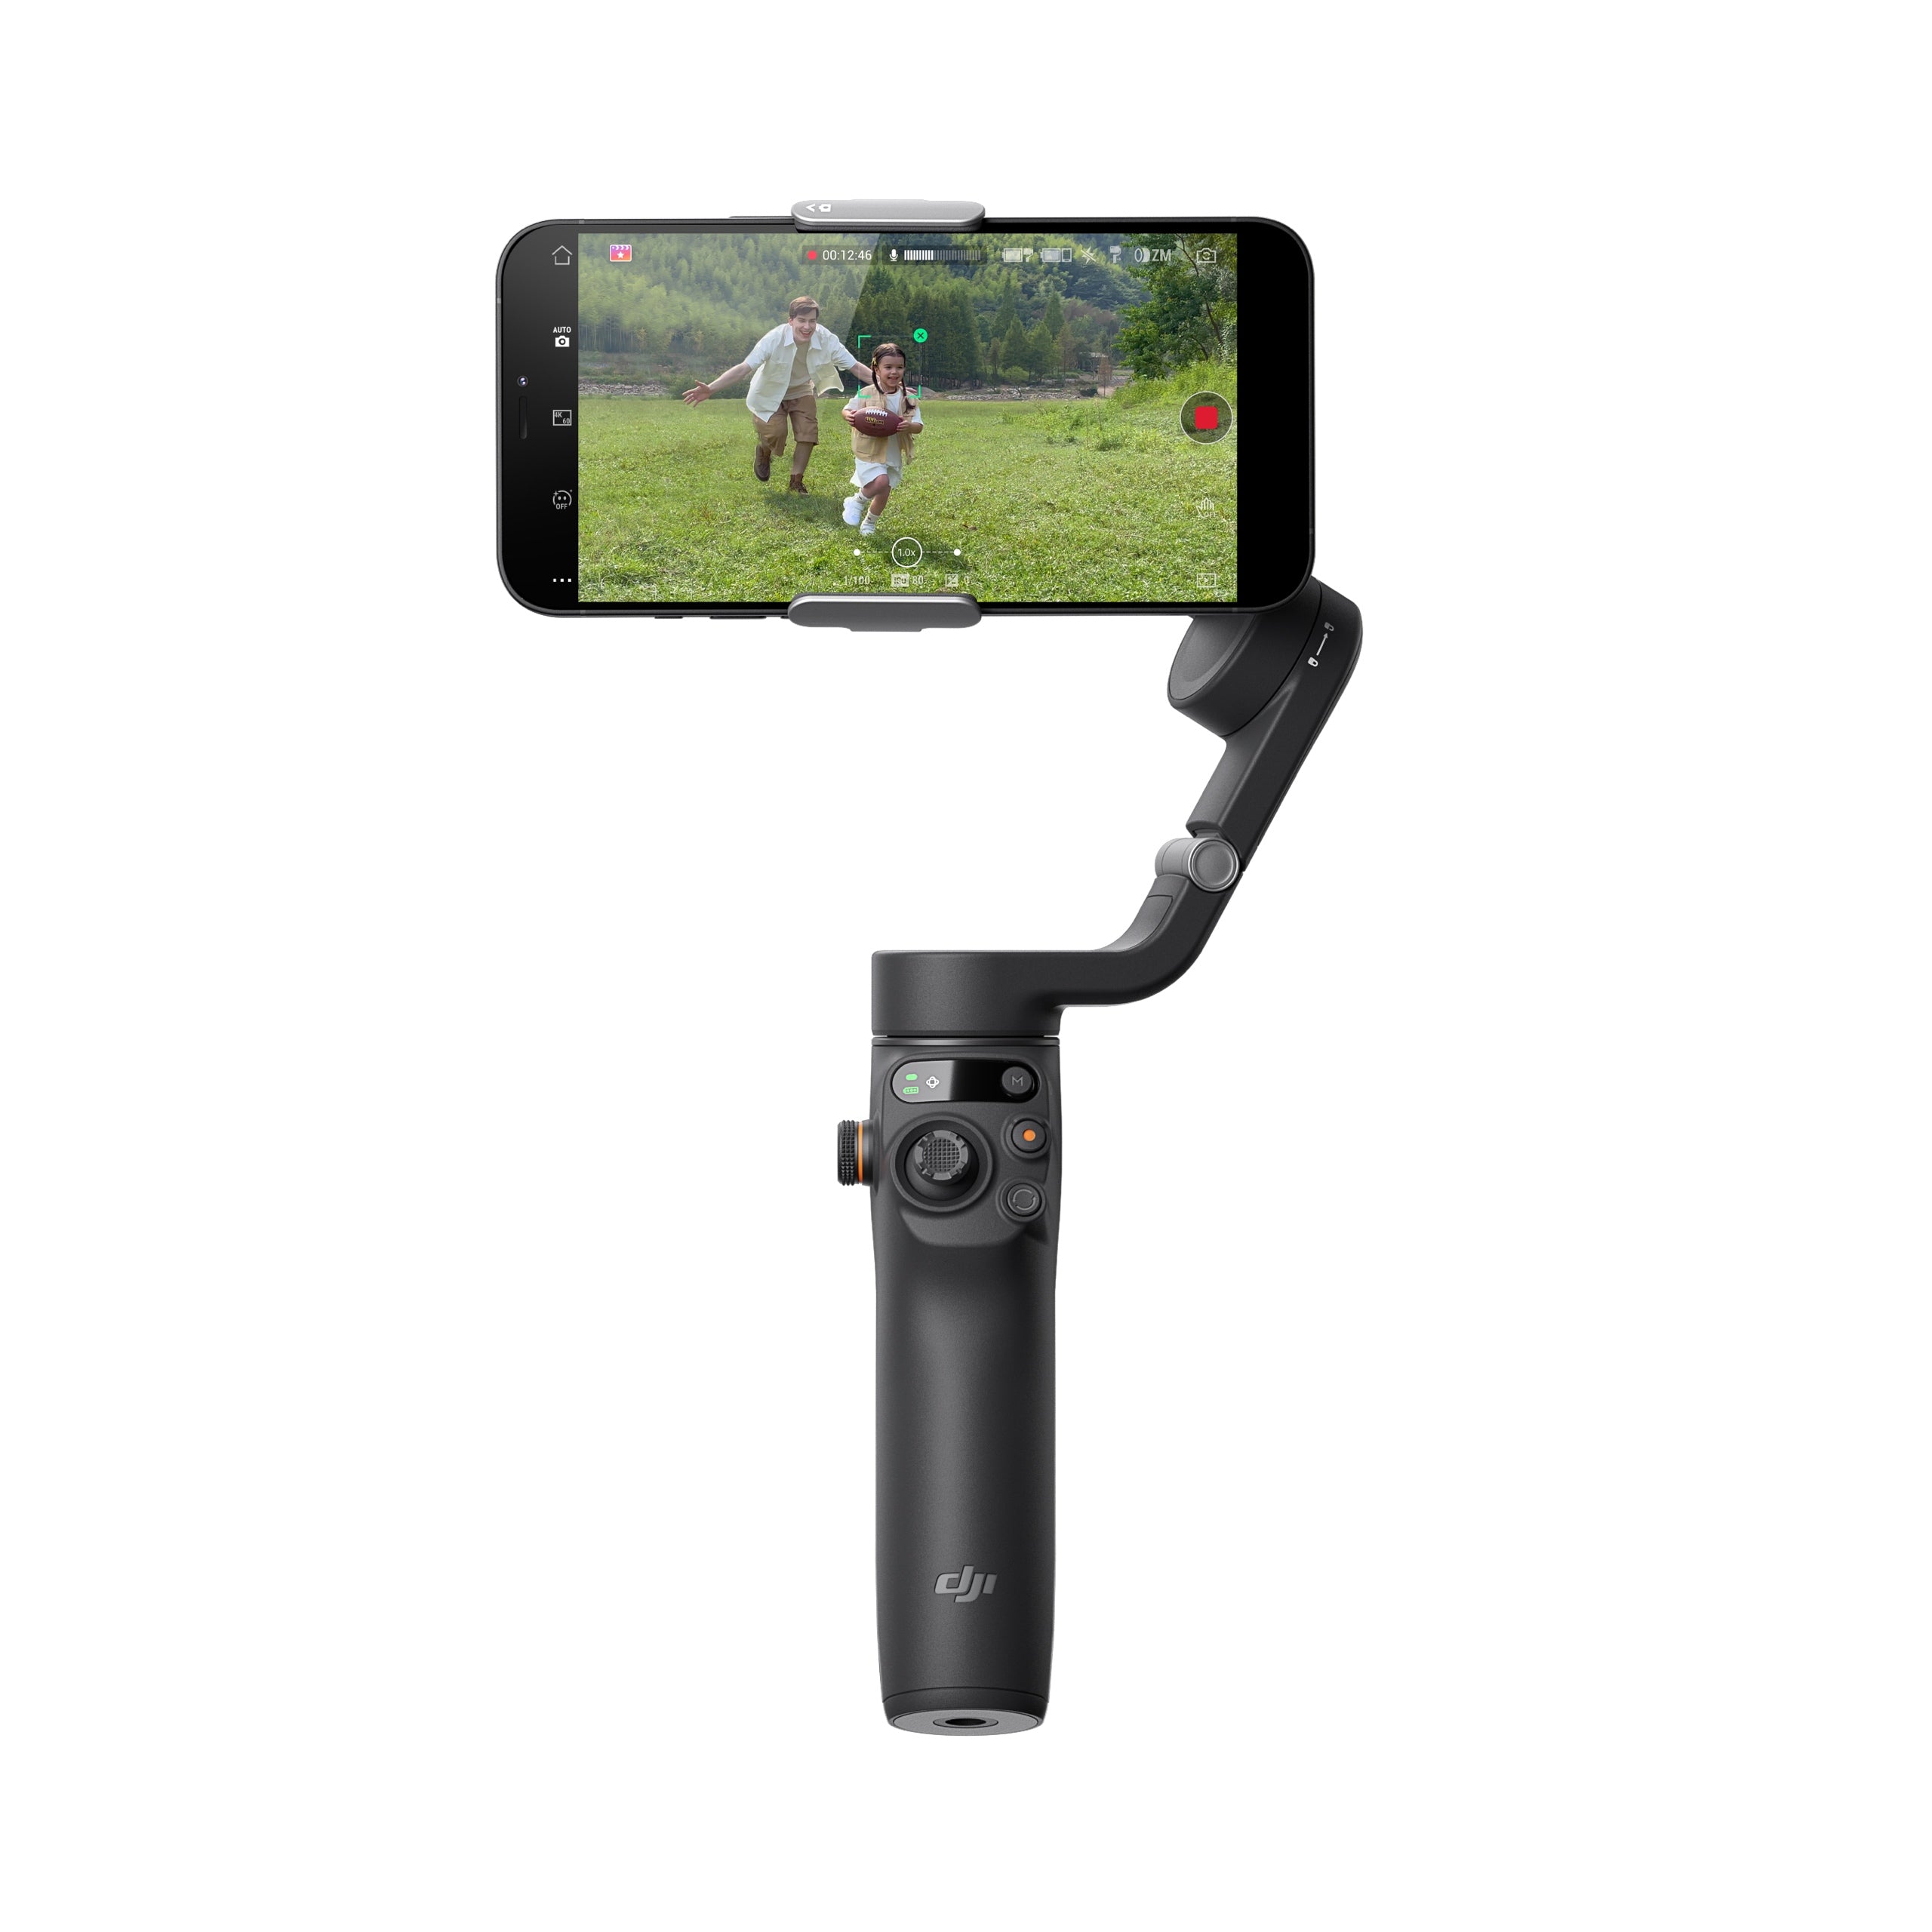 The DJI Osmo Action 4 has convinced me that action cams beat mirrorless for  vacations